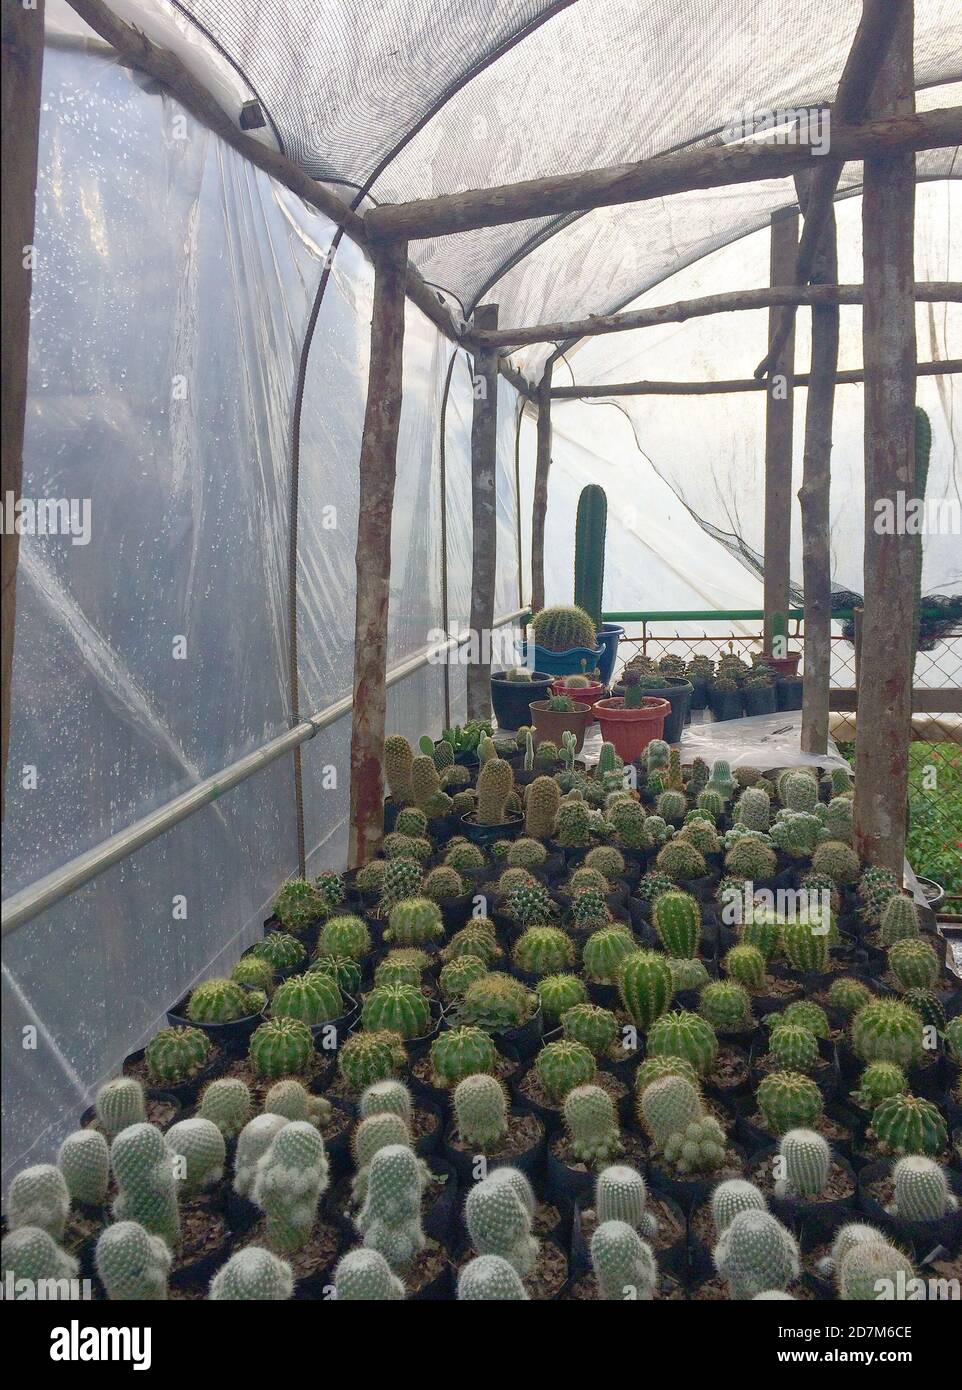 Cacti in flower nursery. Photo taken in a flower greenhouse in Benguet, Philippines, Southeast Asia on October 23, 2020. Stock Photo